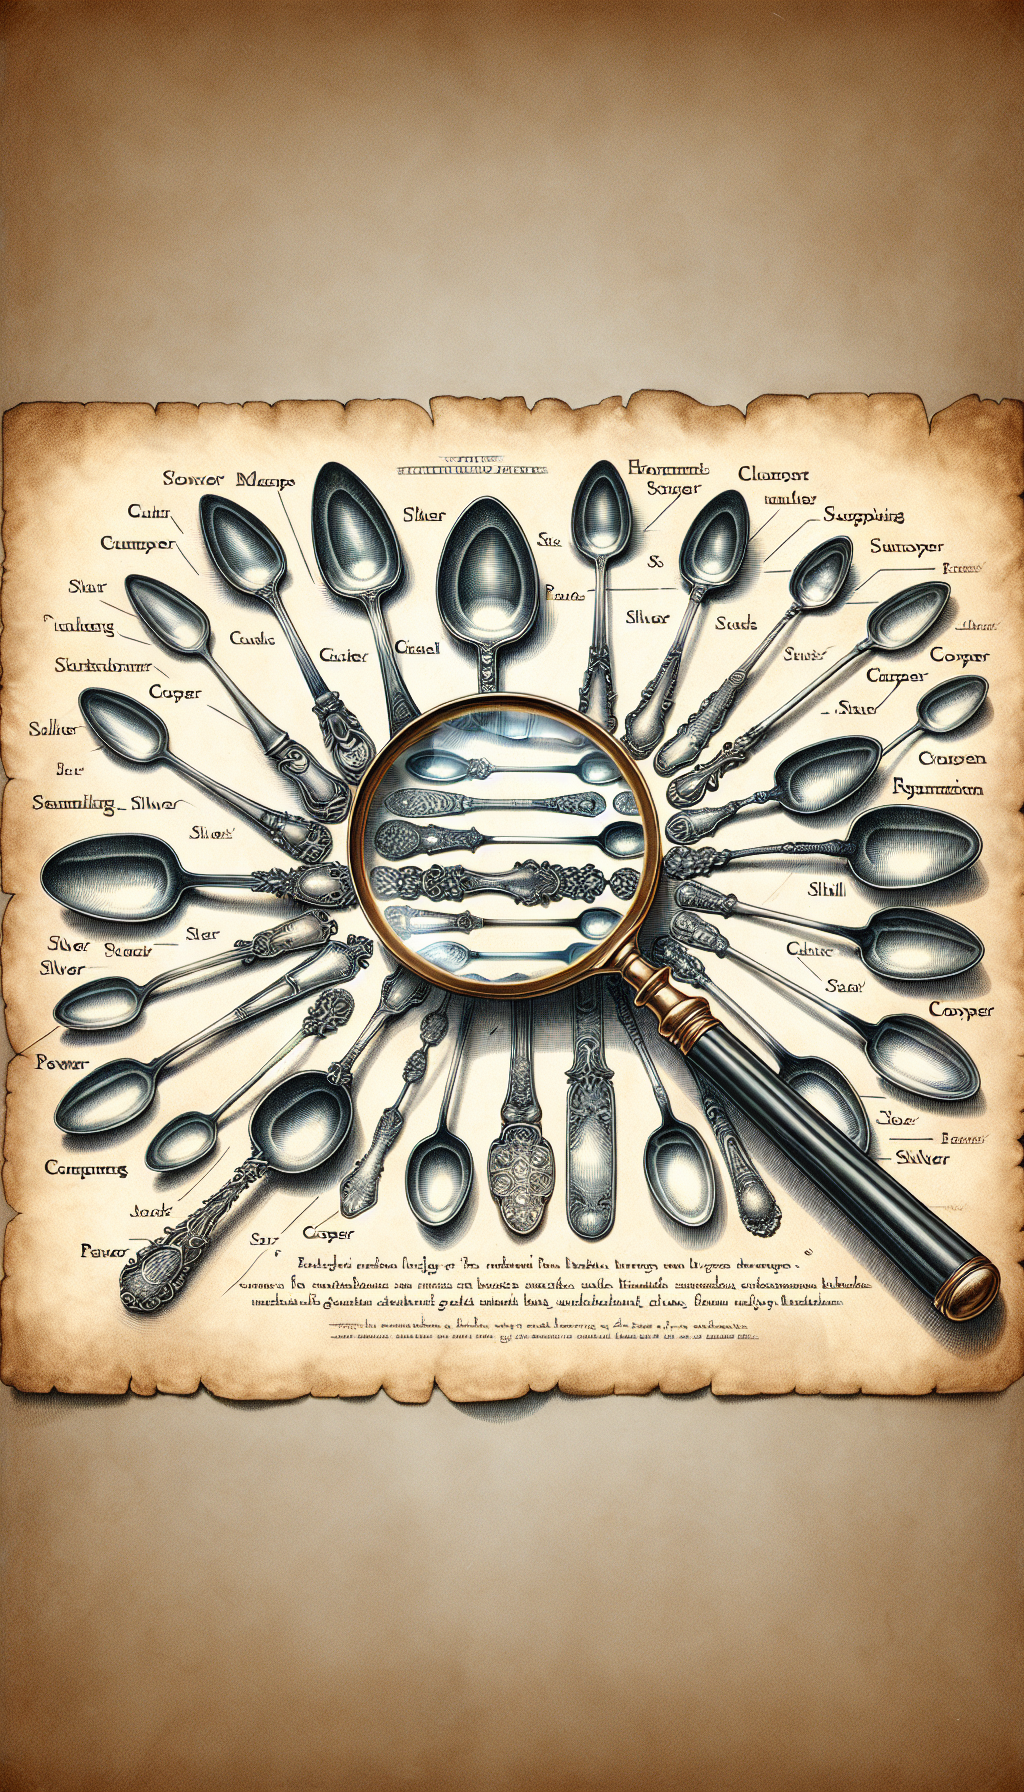 An intricate illustration featuring a collection of antique spoons, each with a distinct metallic luster and ornate engravings, serves as a guide to identifying the materials used in their craftsmanship. The spoons lay atop an aged parchment labeled with the names of the metals—silver, pewter, copper—while a magnifying glass hovers over, revealing the fine details and hallmarks of each piece.